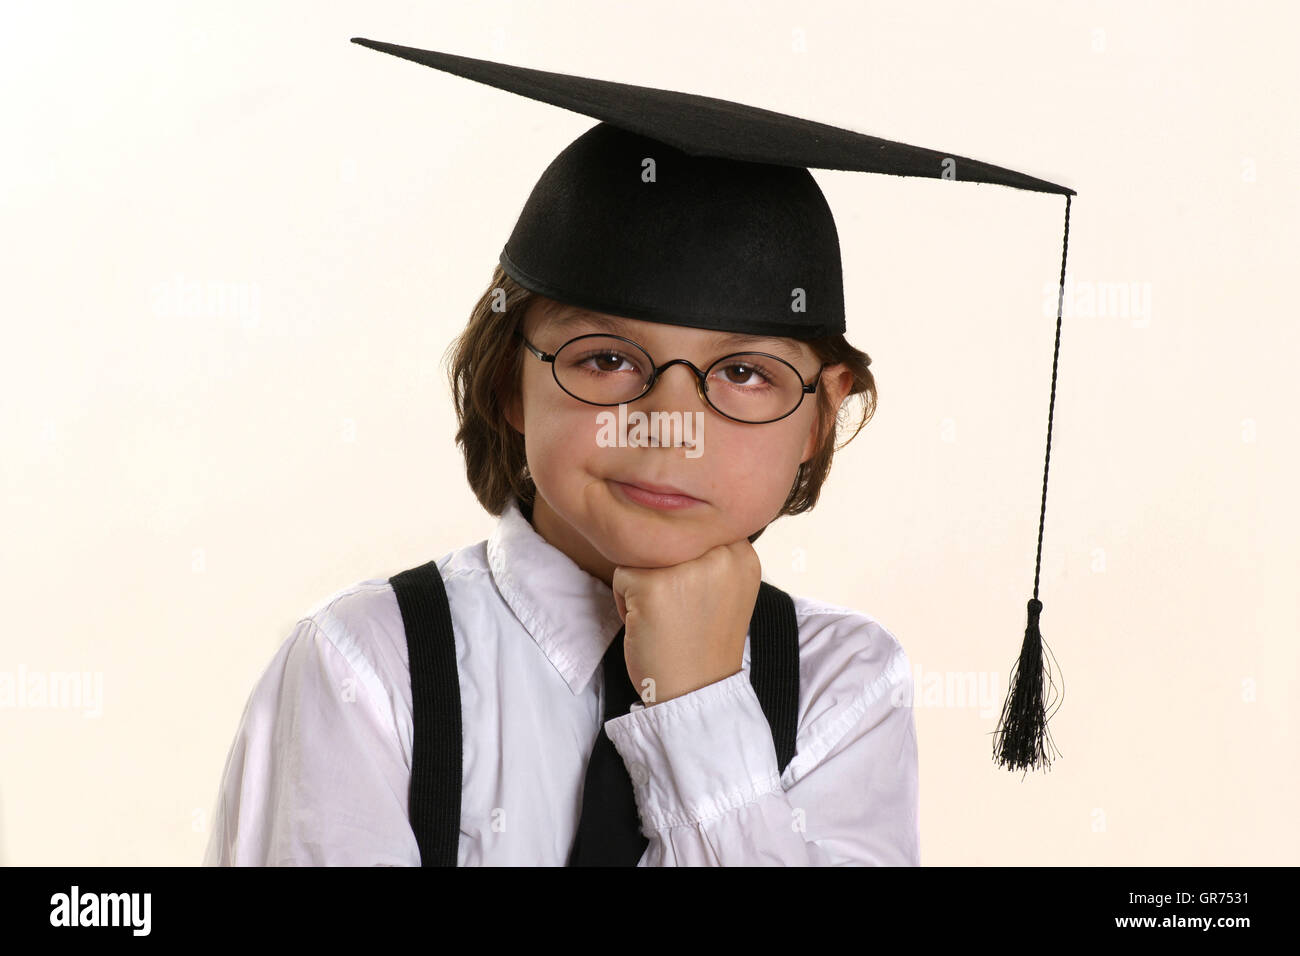 Little Boy With Mortarboard And Diplom Stock Photo